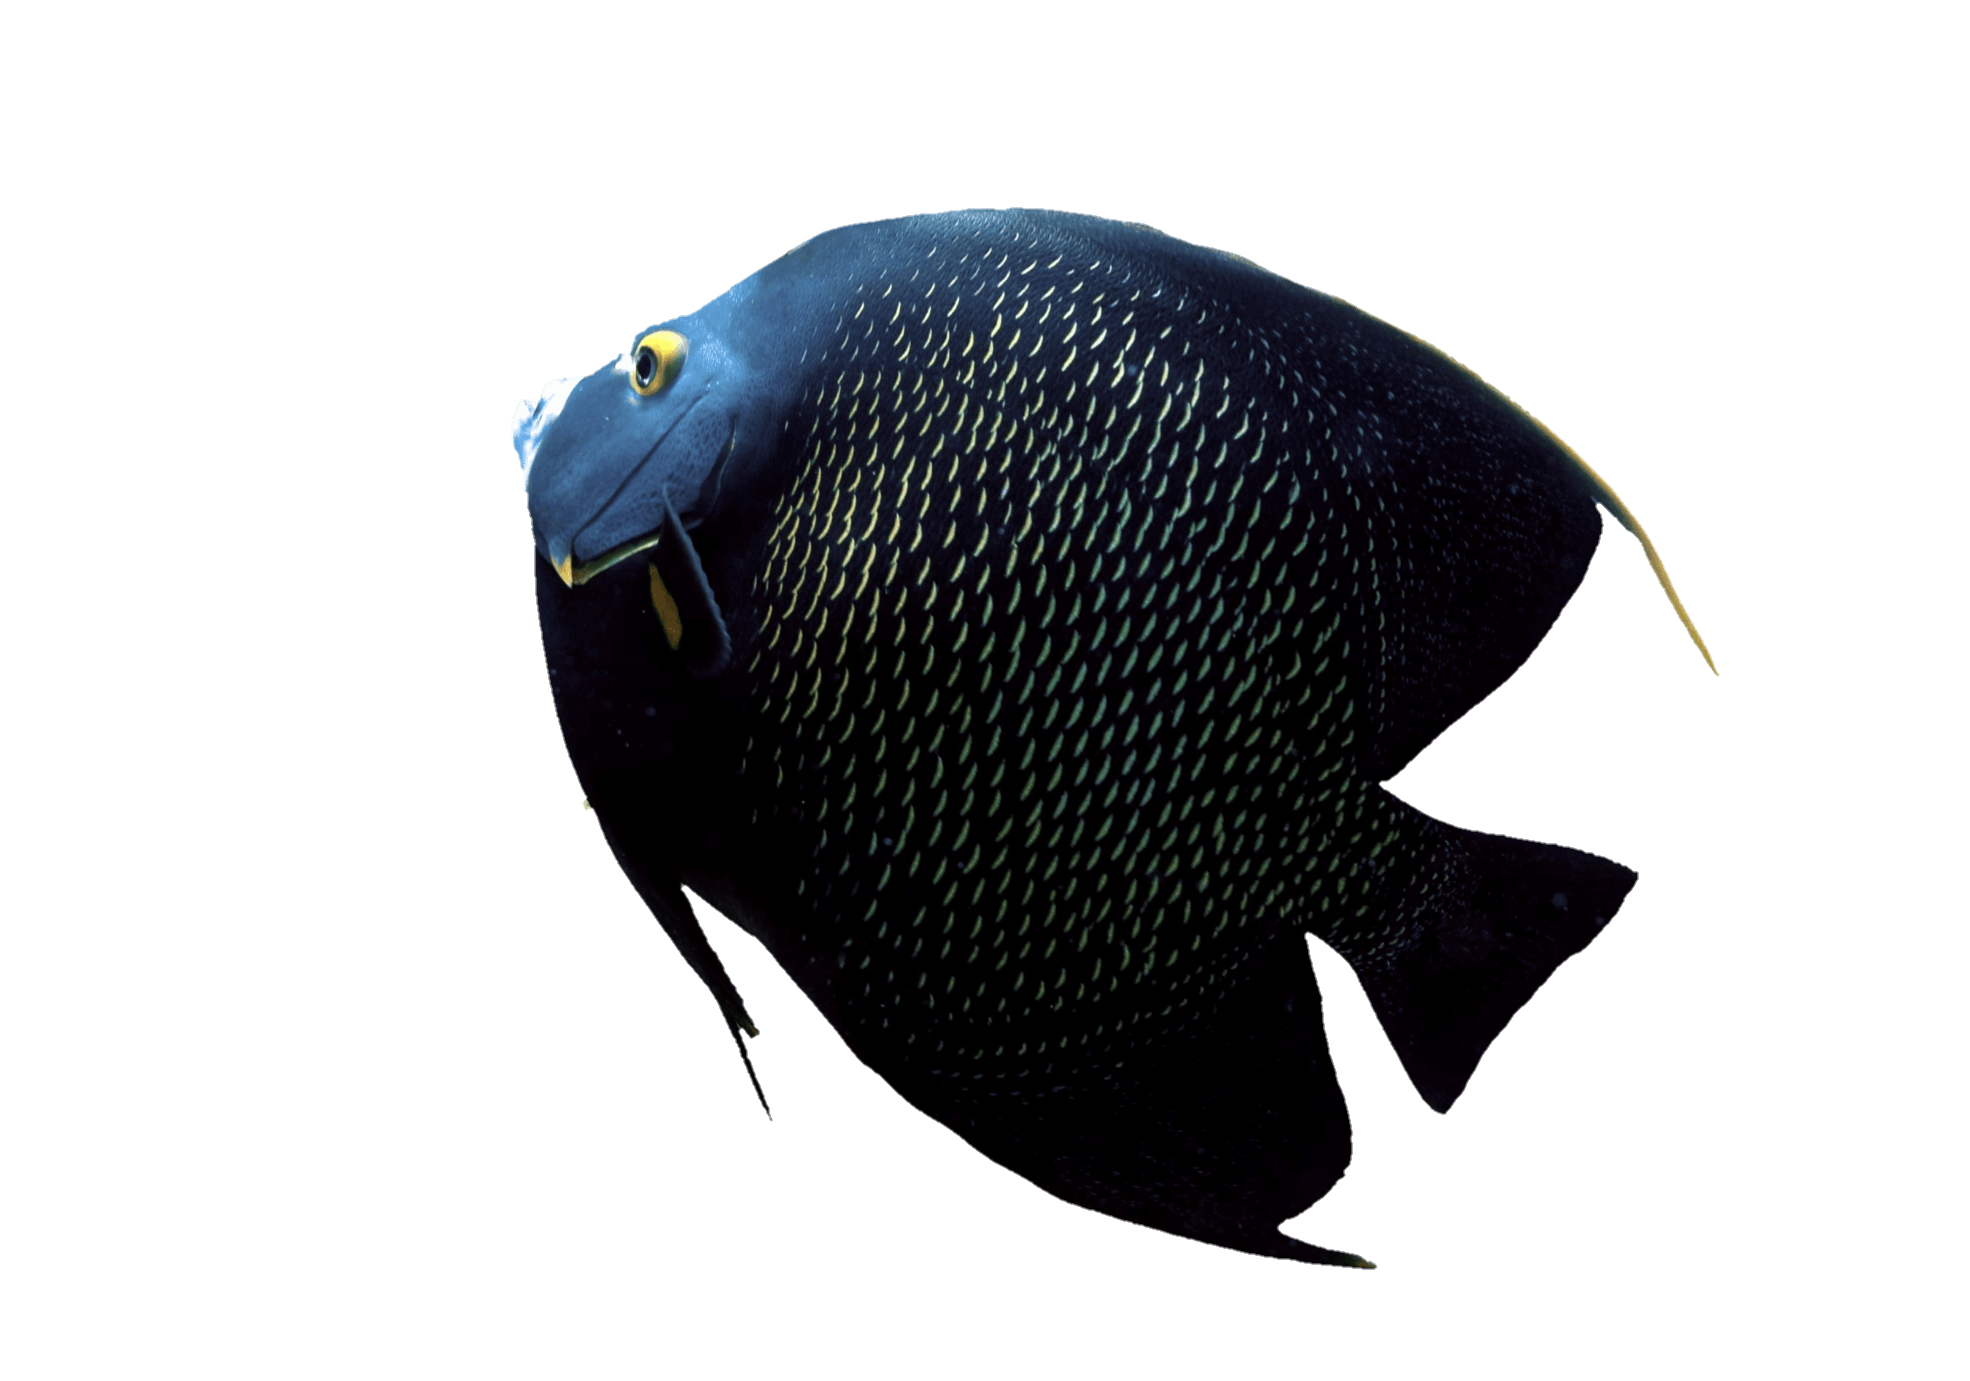 fish-png-from-pngfre-8-1